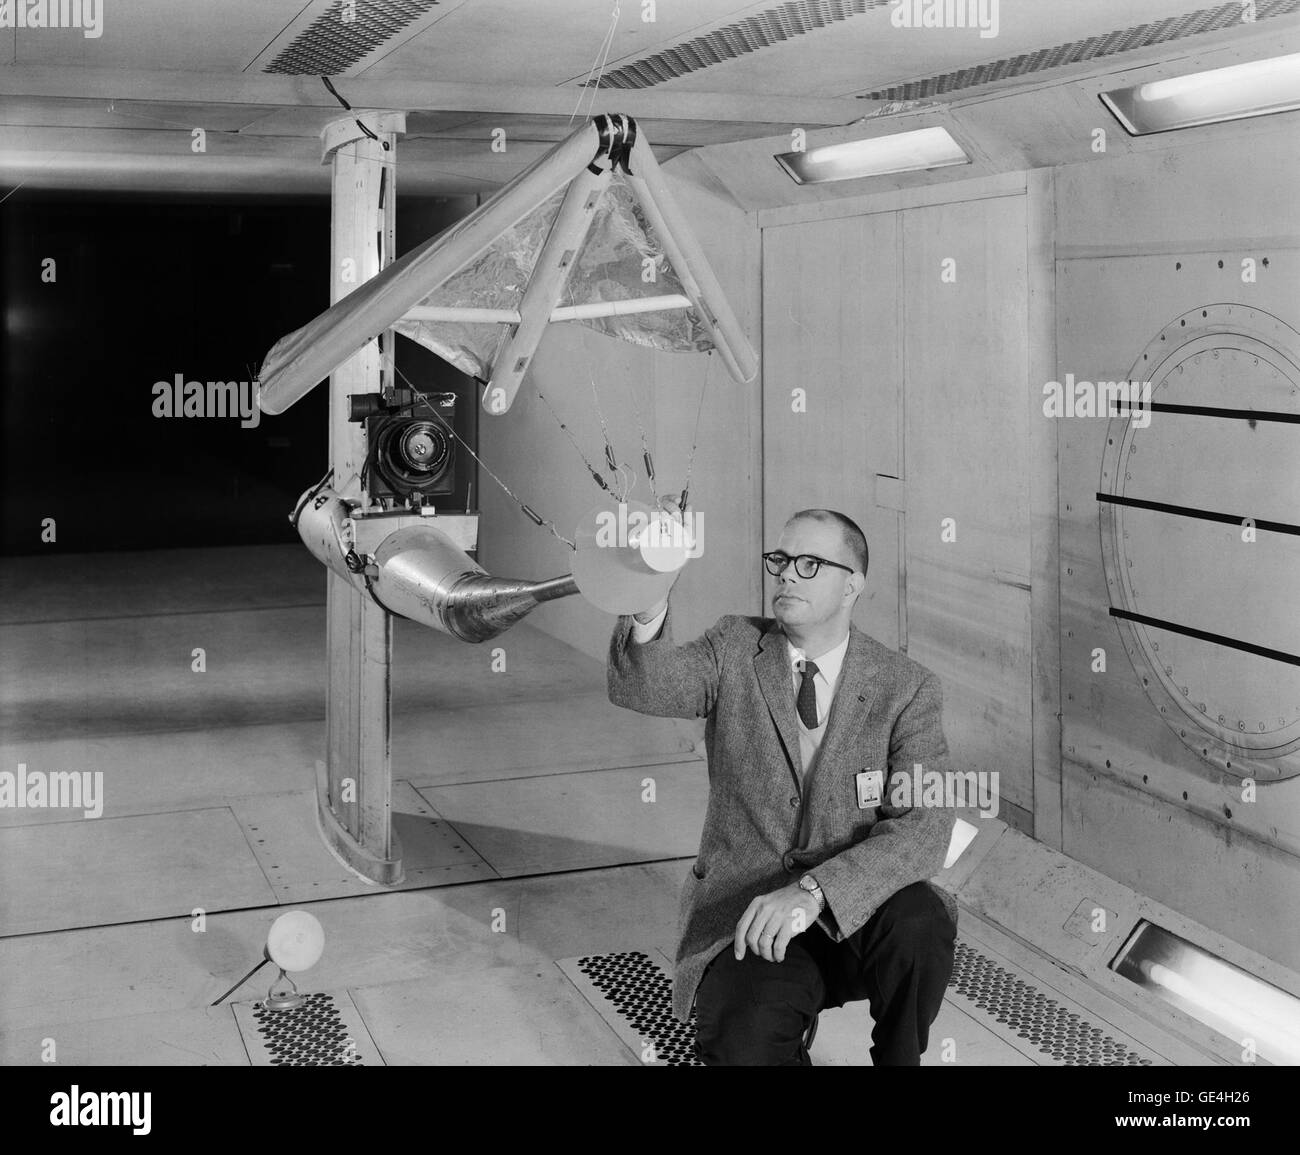 (February 5, 1962) W. C. Sleeman, Jr. inspecting a model of the paraglider in 300 mph 7 x 10 Foot Wind Tunnel. The paraglider, or &quot;Rogallo Wing,&quot; was proposed for use in the Gemini Program. It would have allowed Gemini to make precision landings on land, rather than in the water. But the wing suffered a number of problems. The biggest problem was getting it to deploy properly and reliably. The plan was canceled.   Image # : L-1962-00816 Stock Photo